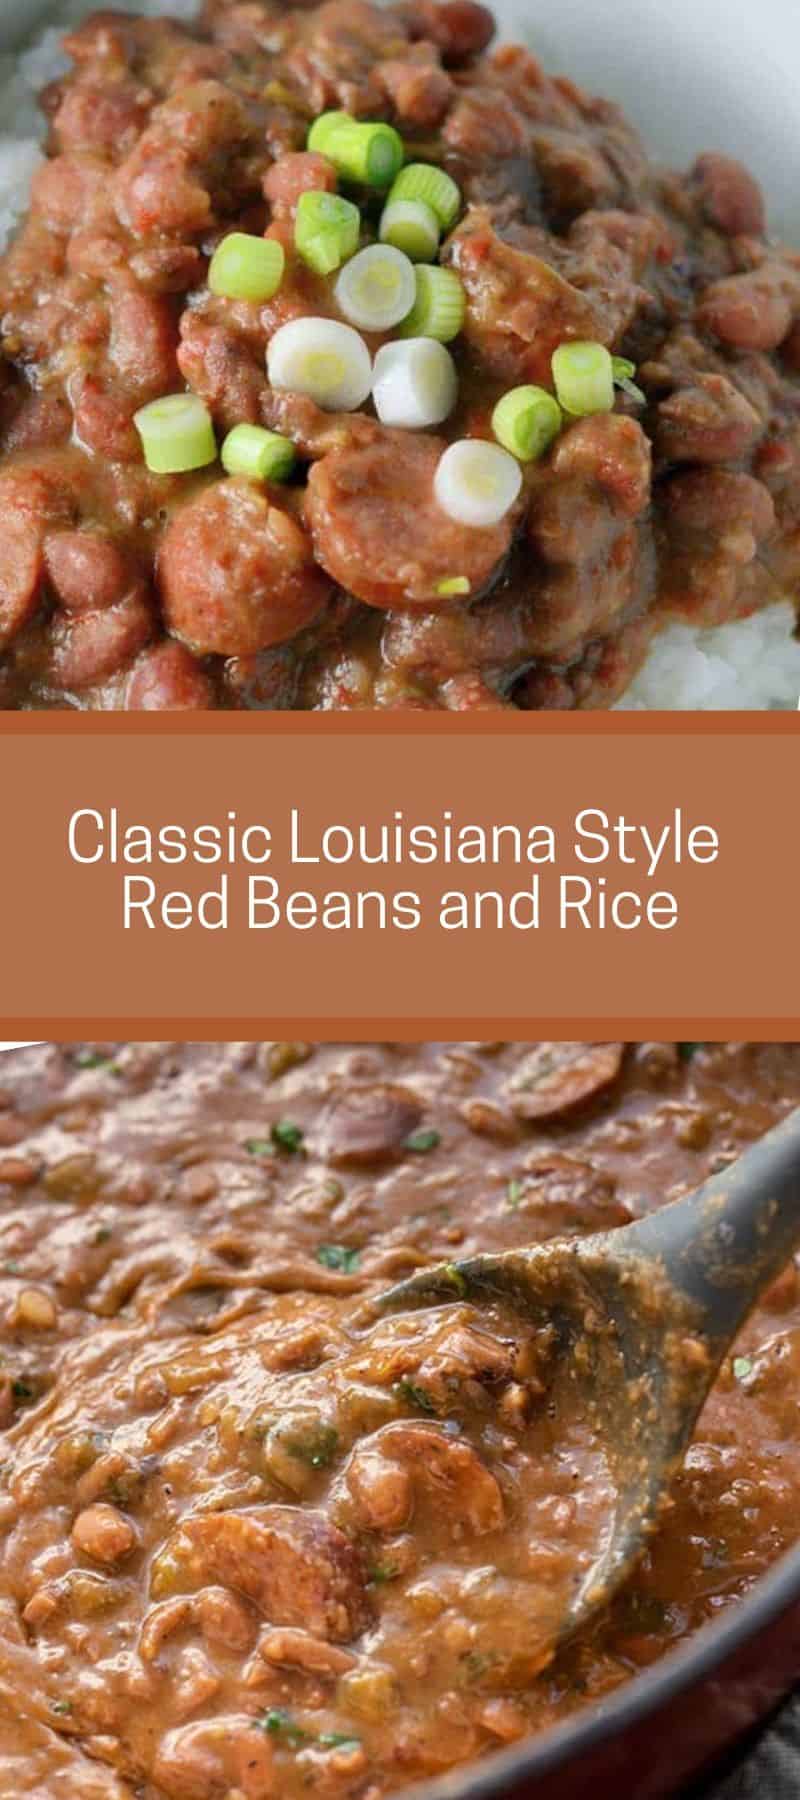 Classic Louisiana Style Red Beans and Rice Recipe 3